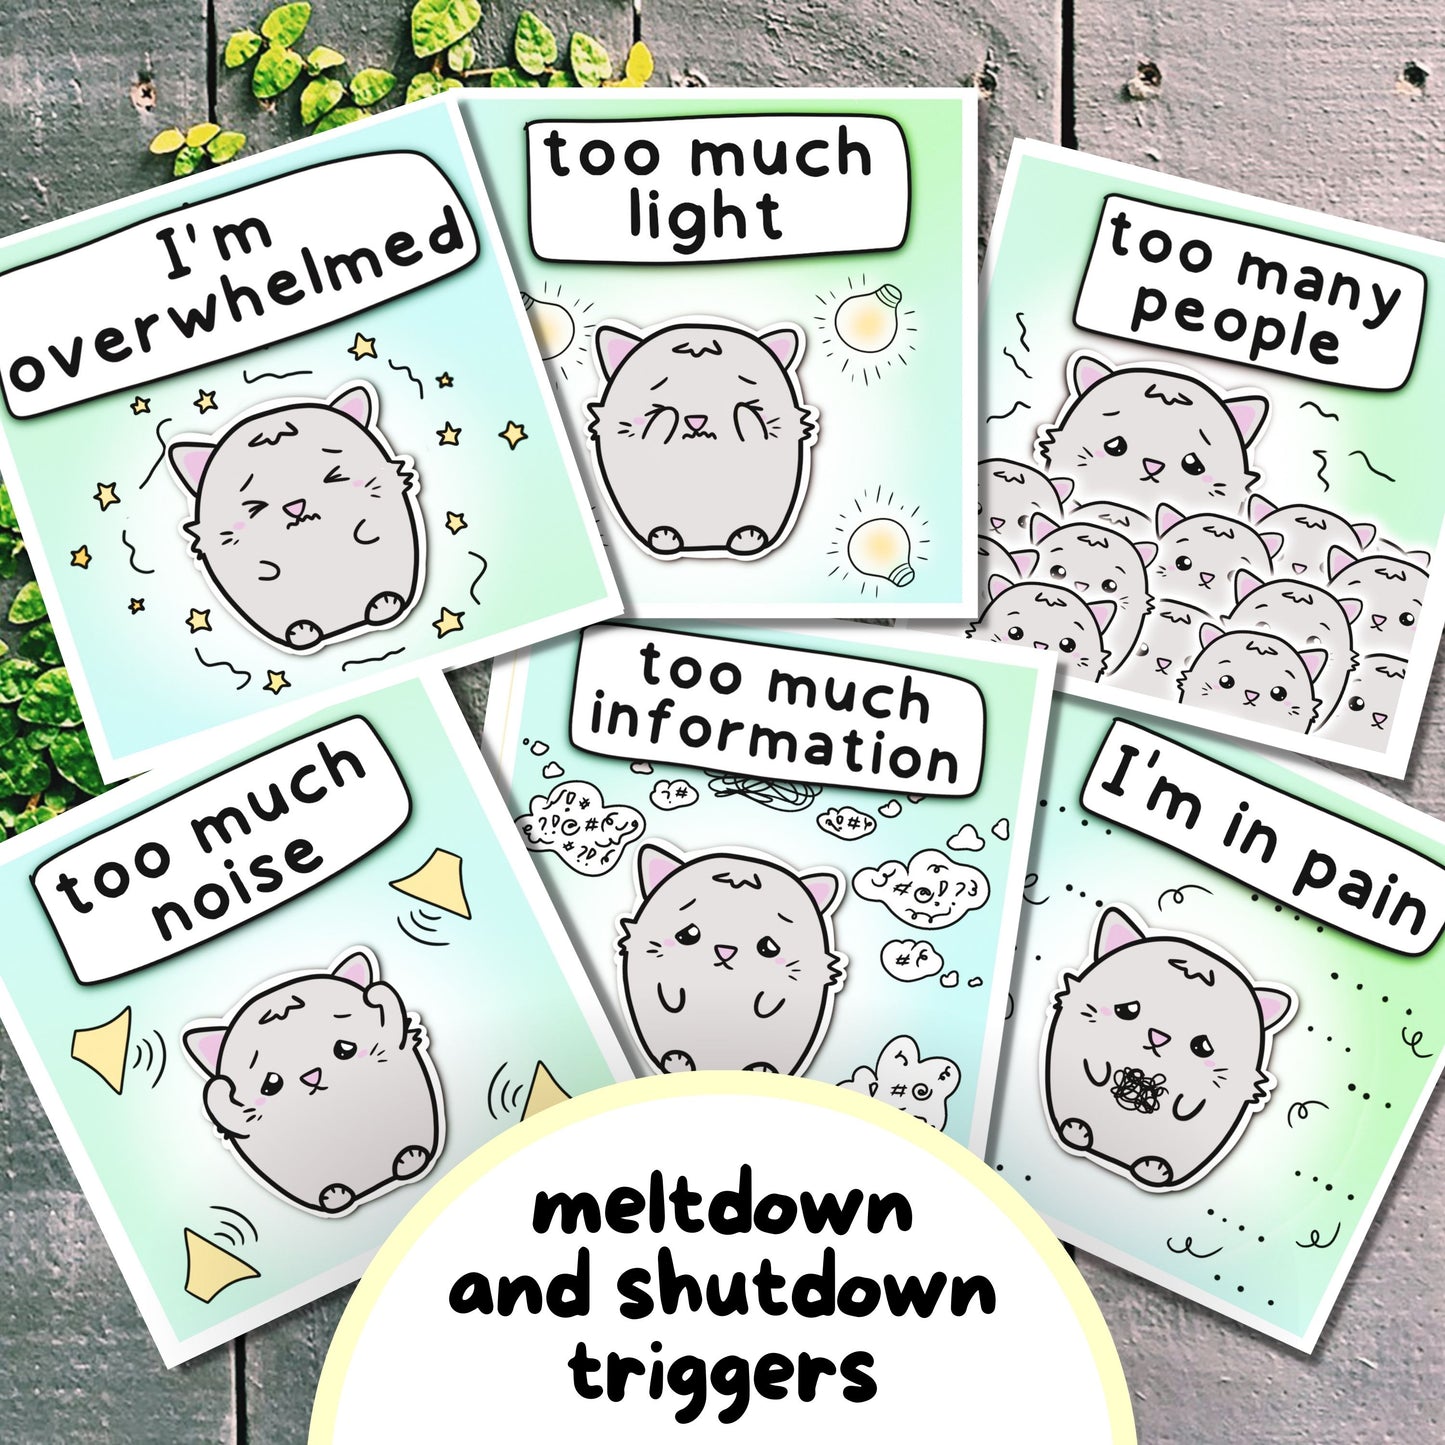 Cat-Design Communication Cards and Affirmation Cards, Hidden Disability Cards, for people with Selective Mutism, Autism, ADHD, Anxety. The set includes communication cards for autistic meltdowns and shutdowns as well. Hand-drawn by an autistic artist (LiL Penguin Studios)